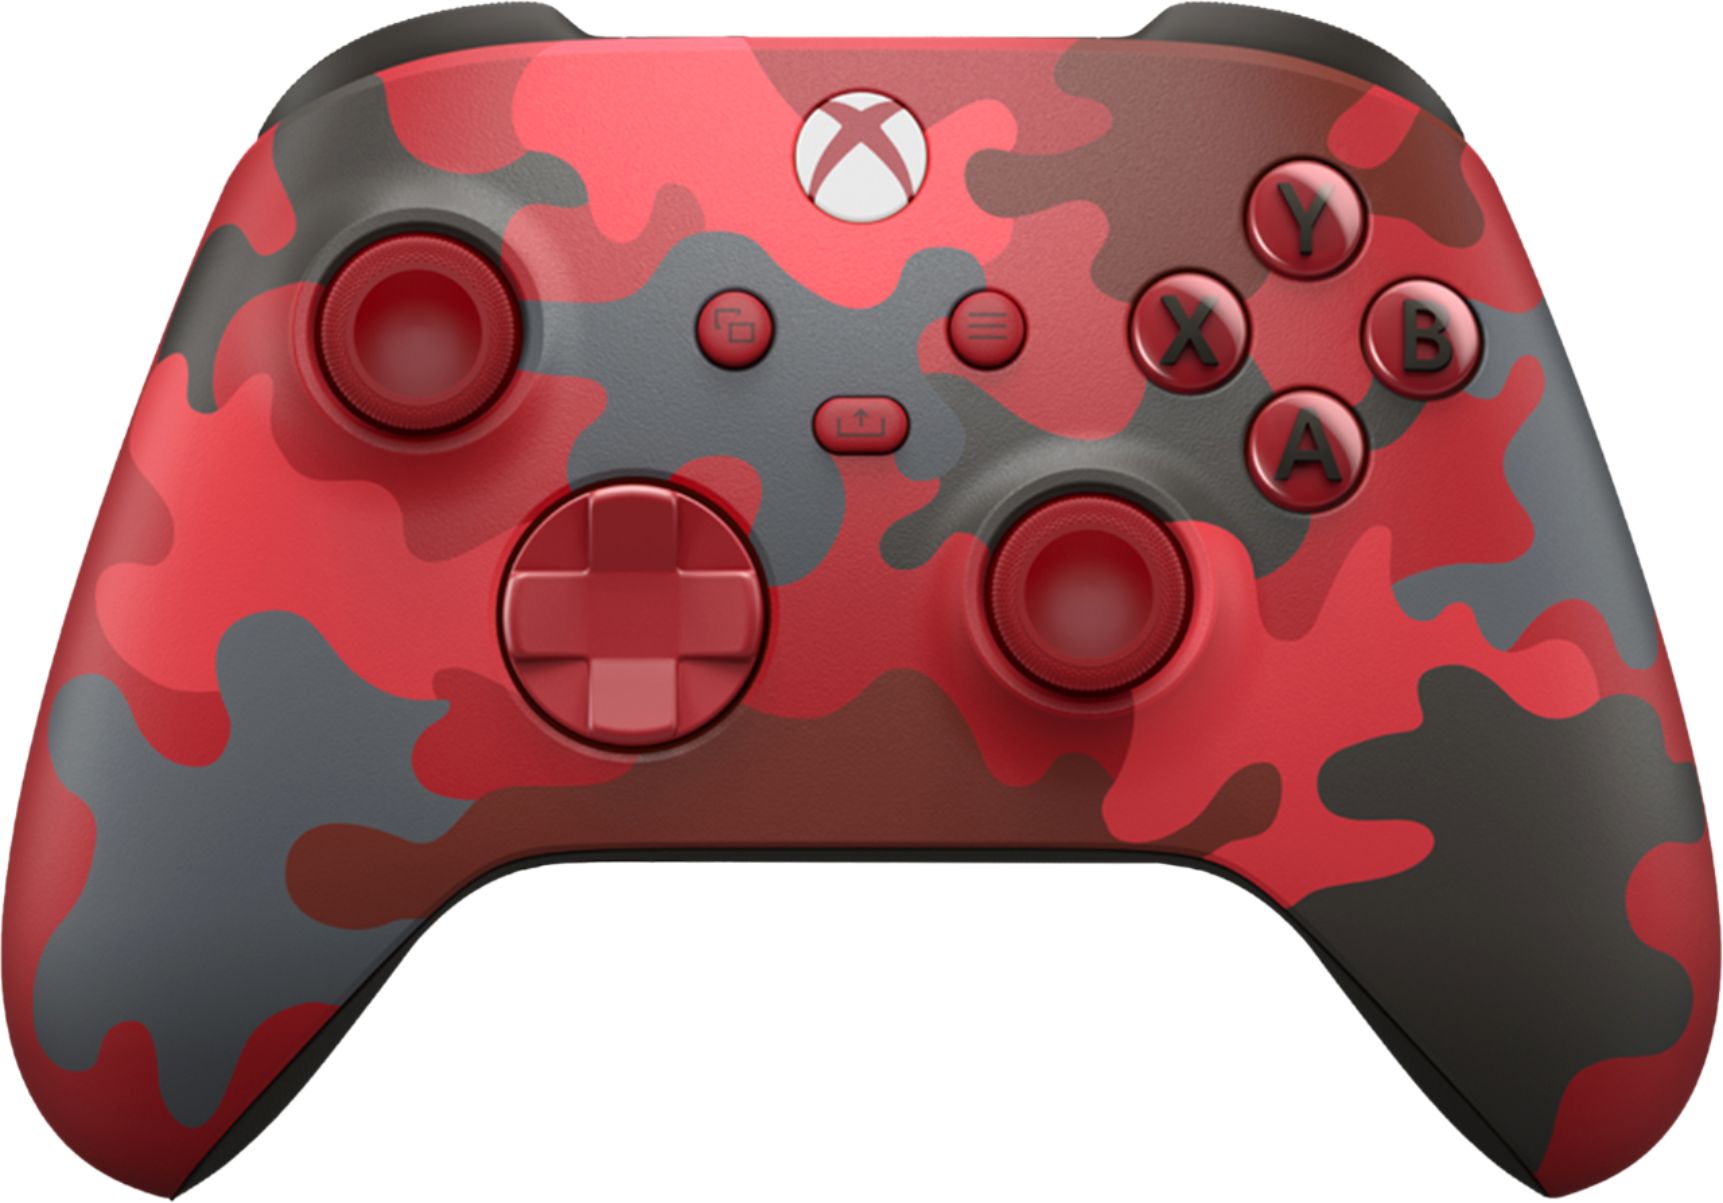 Microsoft - Controller for Xbox Series X, Xbox Series S, and Xbox One (Latest Model) - Daystrike Camo Special Edition